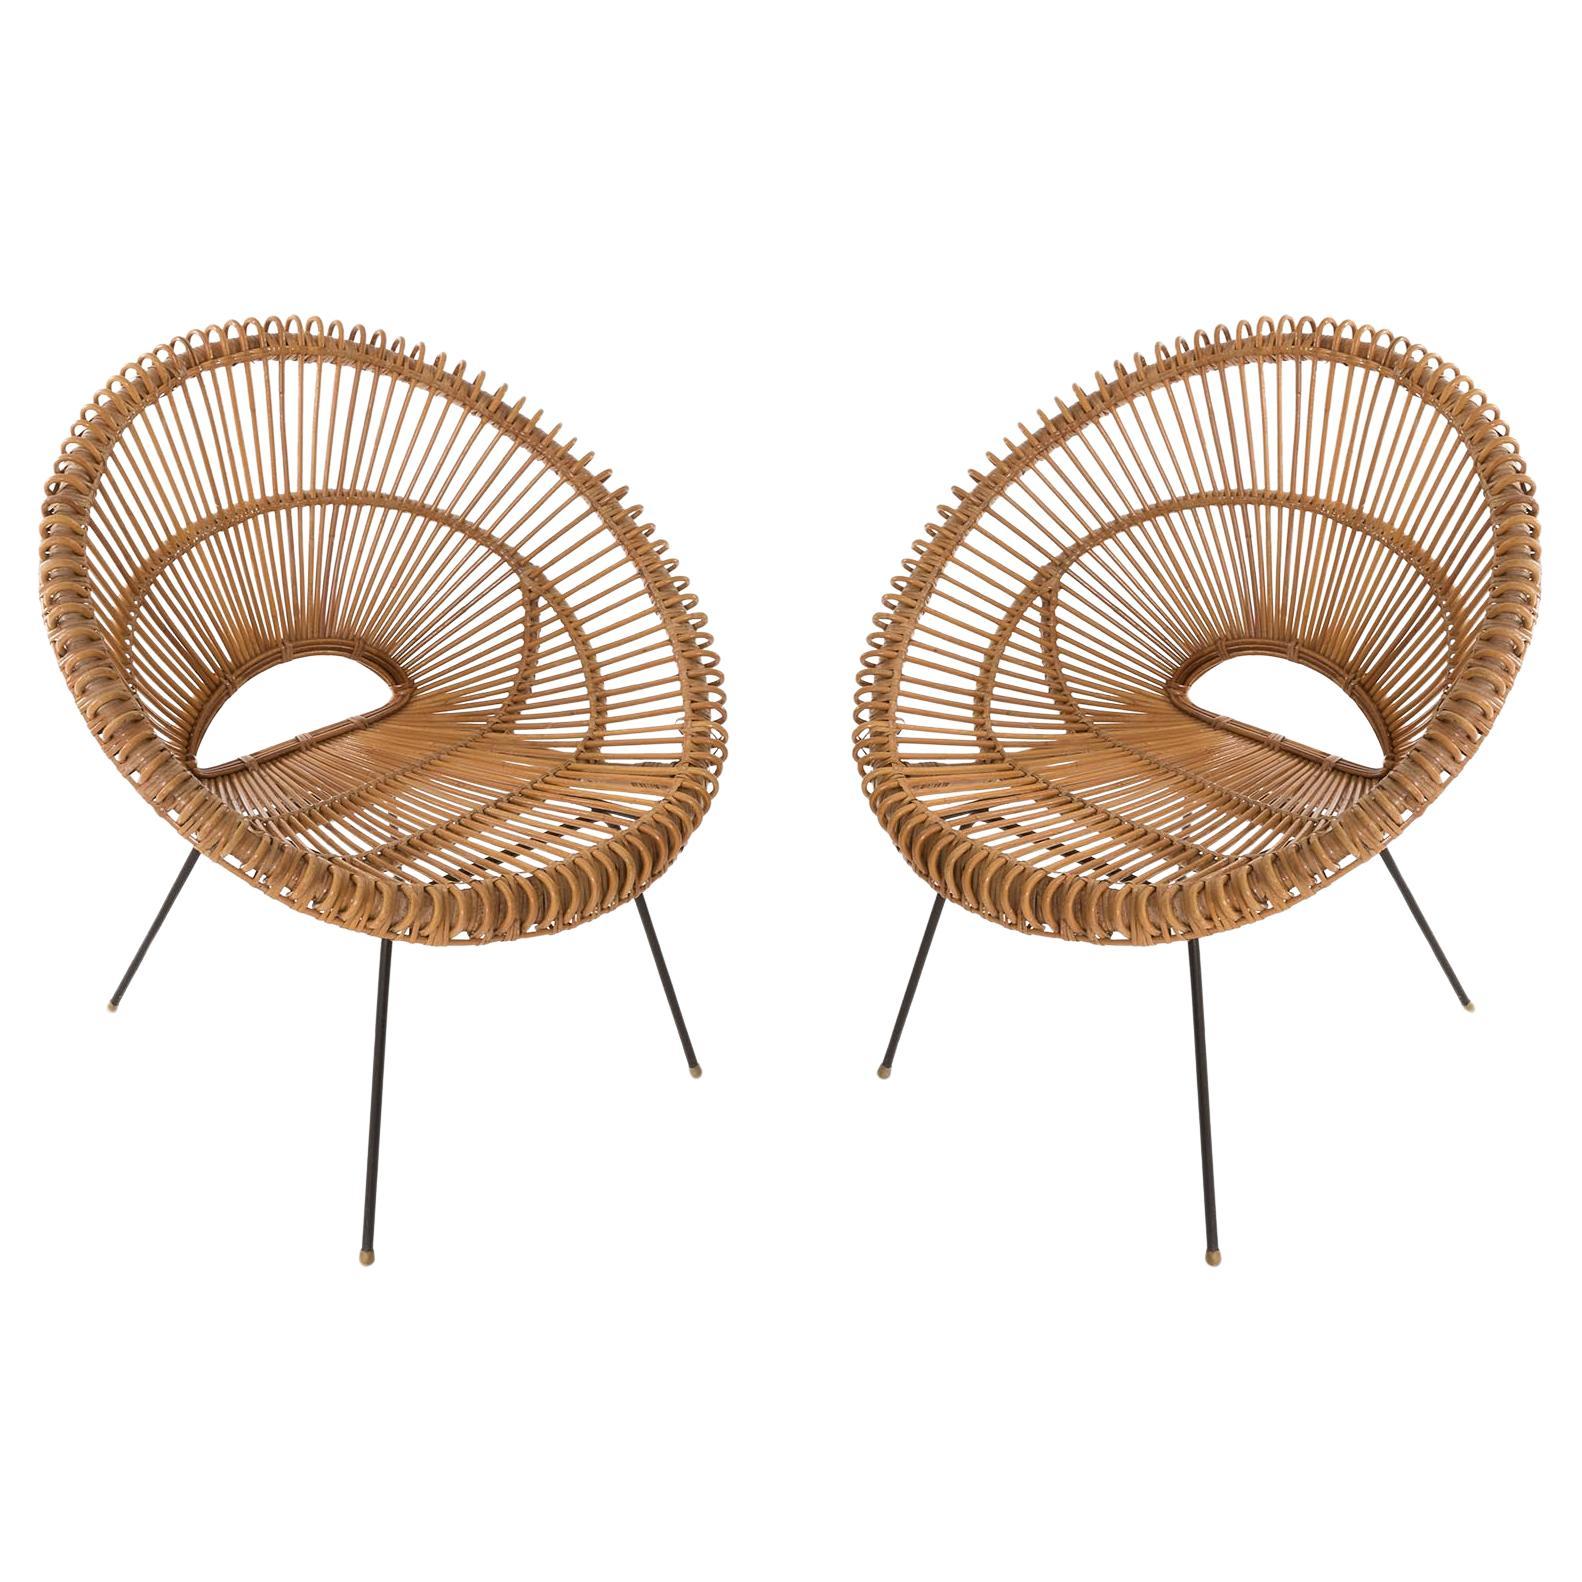 Pair of Mid-Century Modern Rattan Bamboo Chairs, Janine Abraham, Dirk Rol, 1960s For Sale